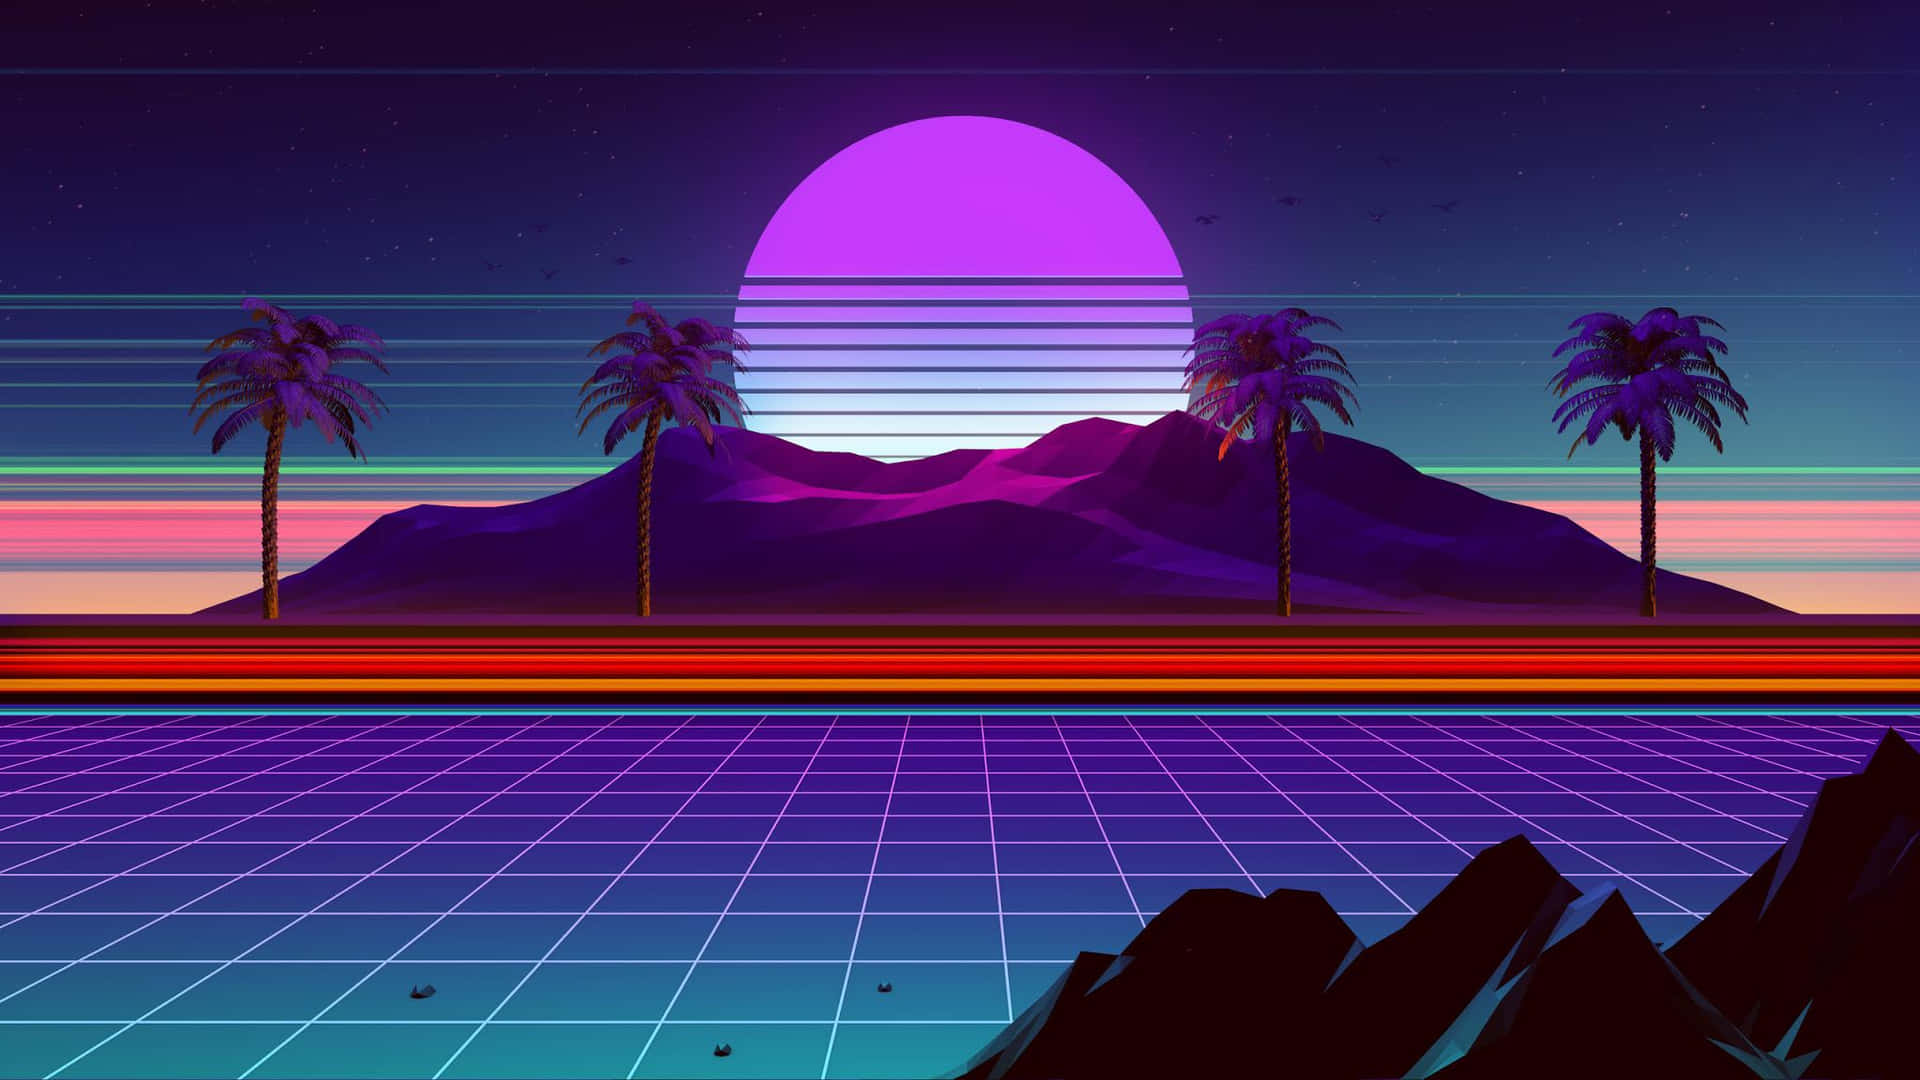 Take a moment to appreciate the endless beauty of a Retro Sunset Wallpaper